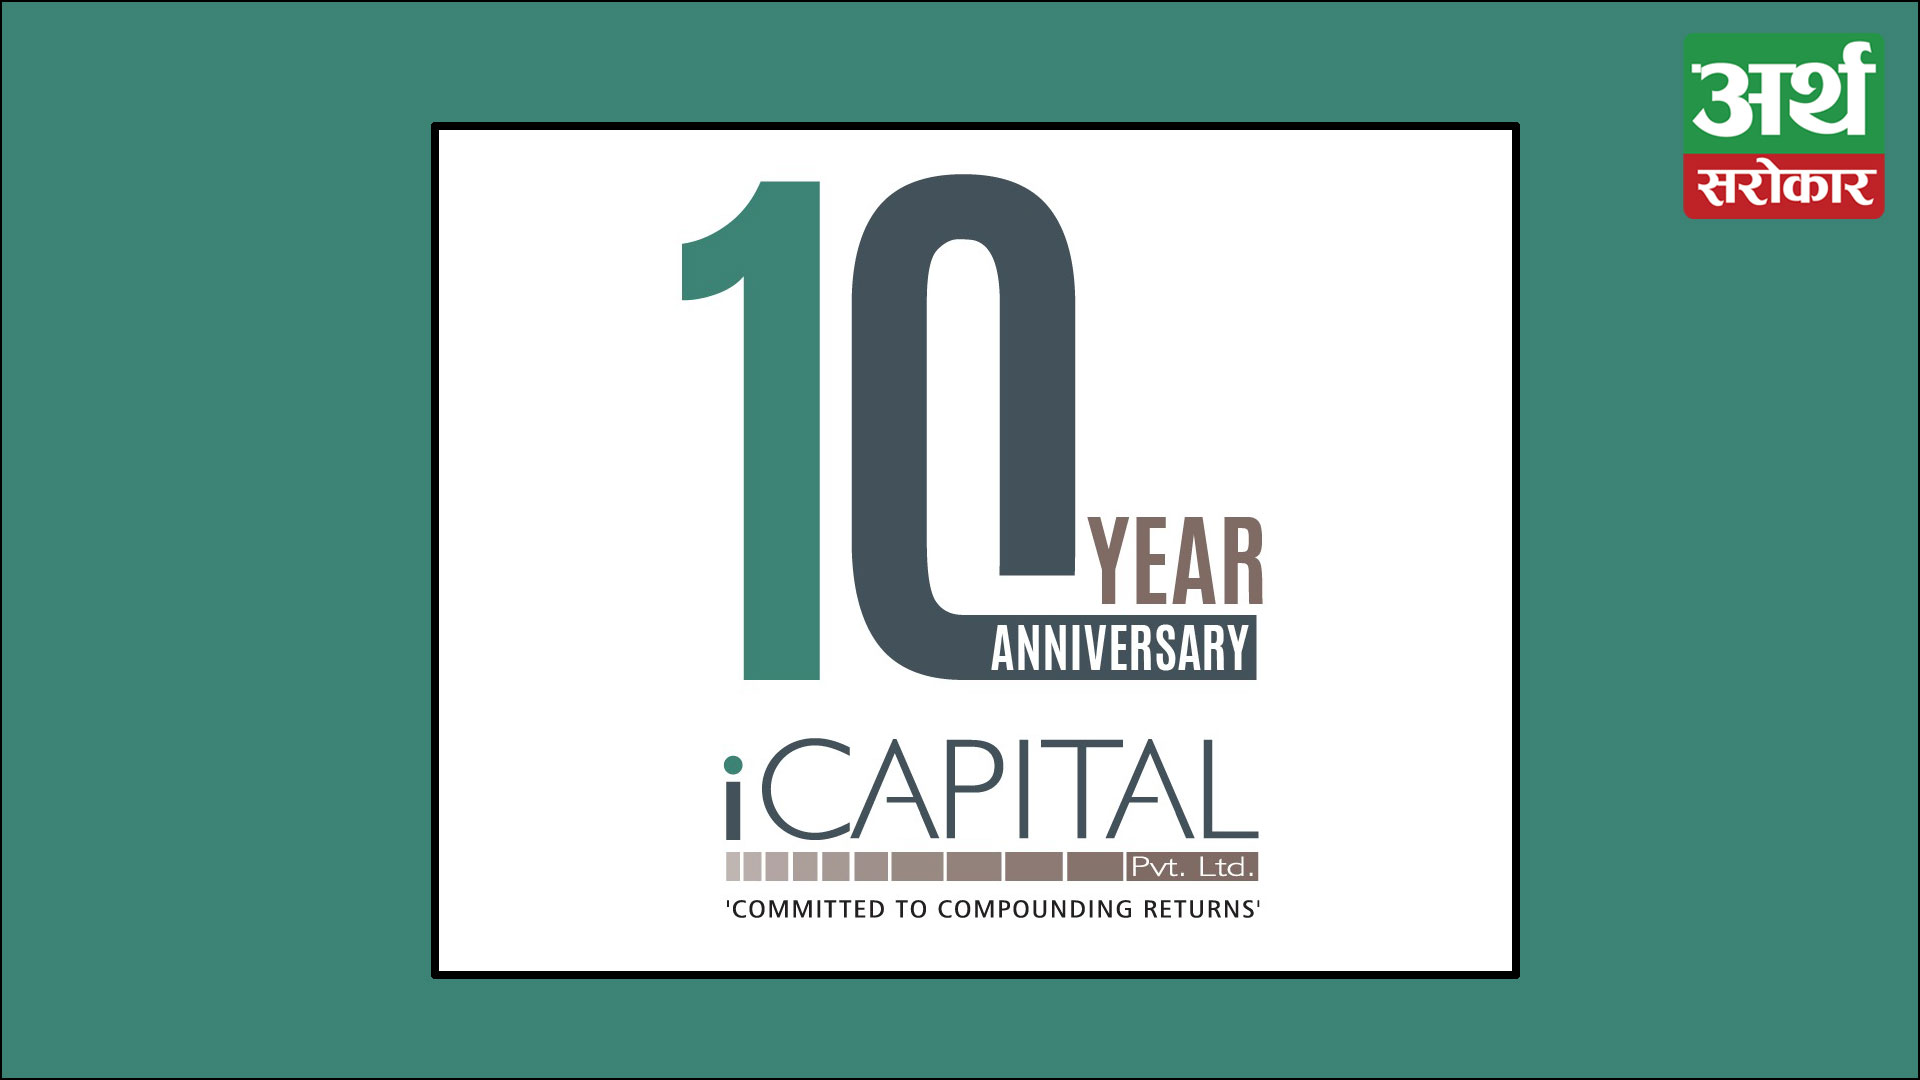 iCapital completes 10 years of operation